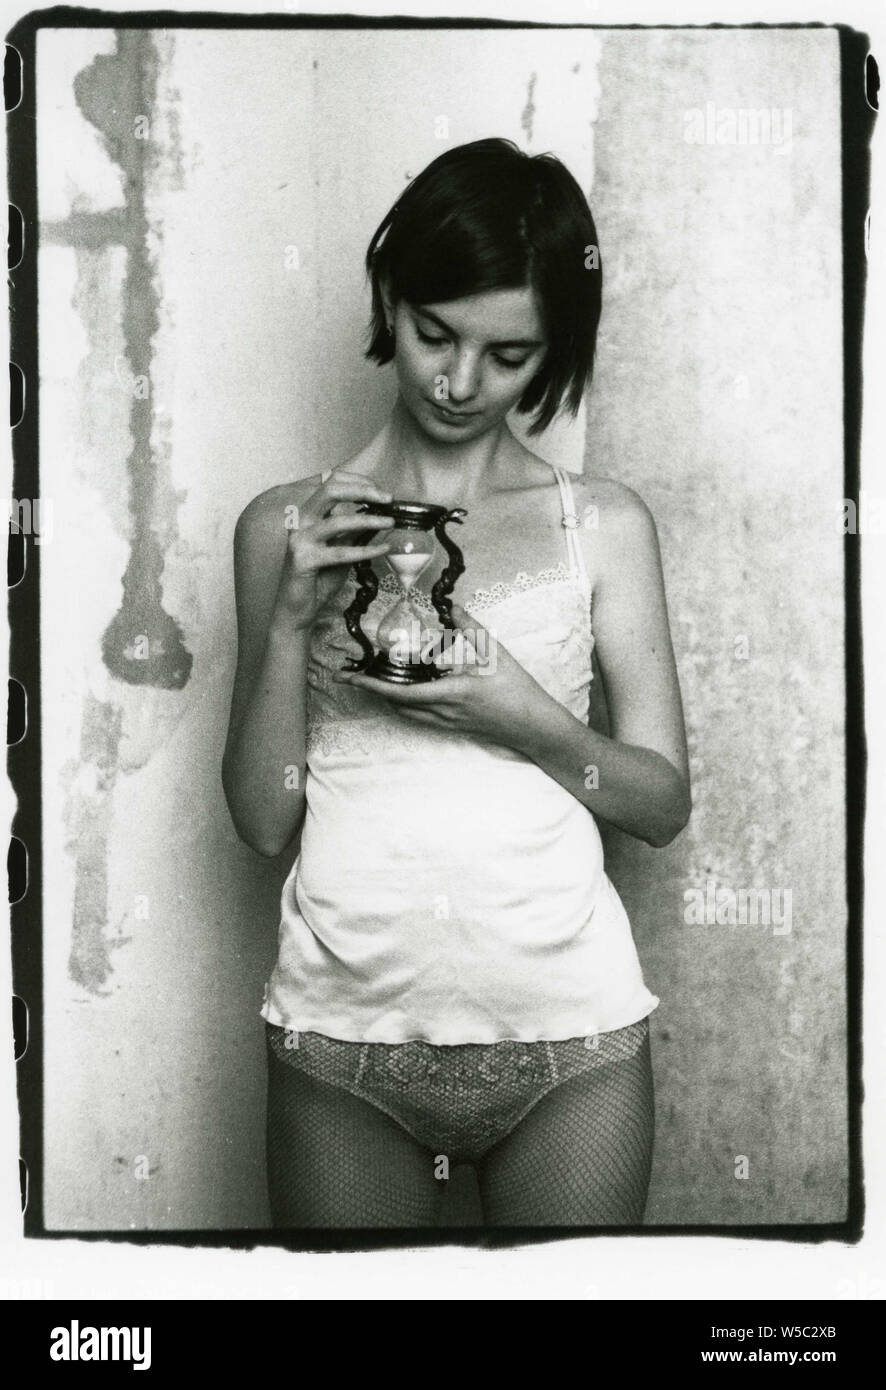 Girl in panties, pantyhose and nightgown holding an hourglass. Attention!  Image contains grit and other analog photography artifacts! Stock Photo -  Alamy